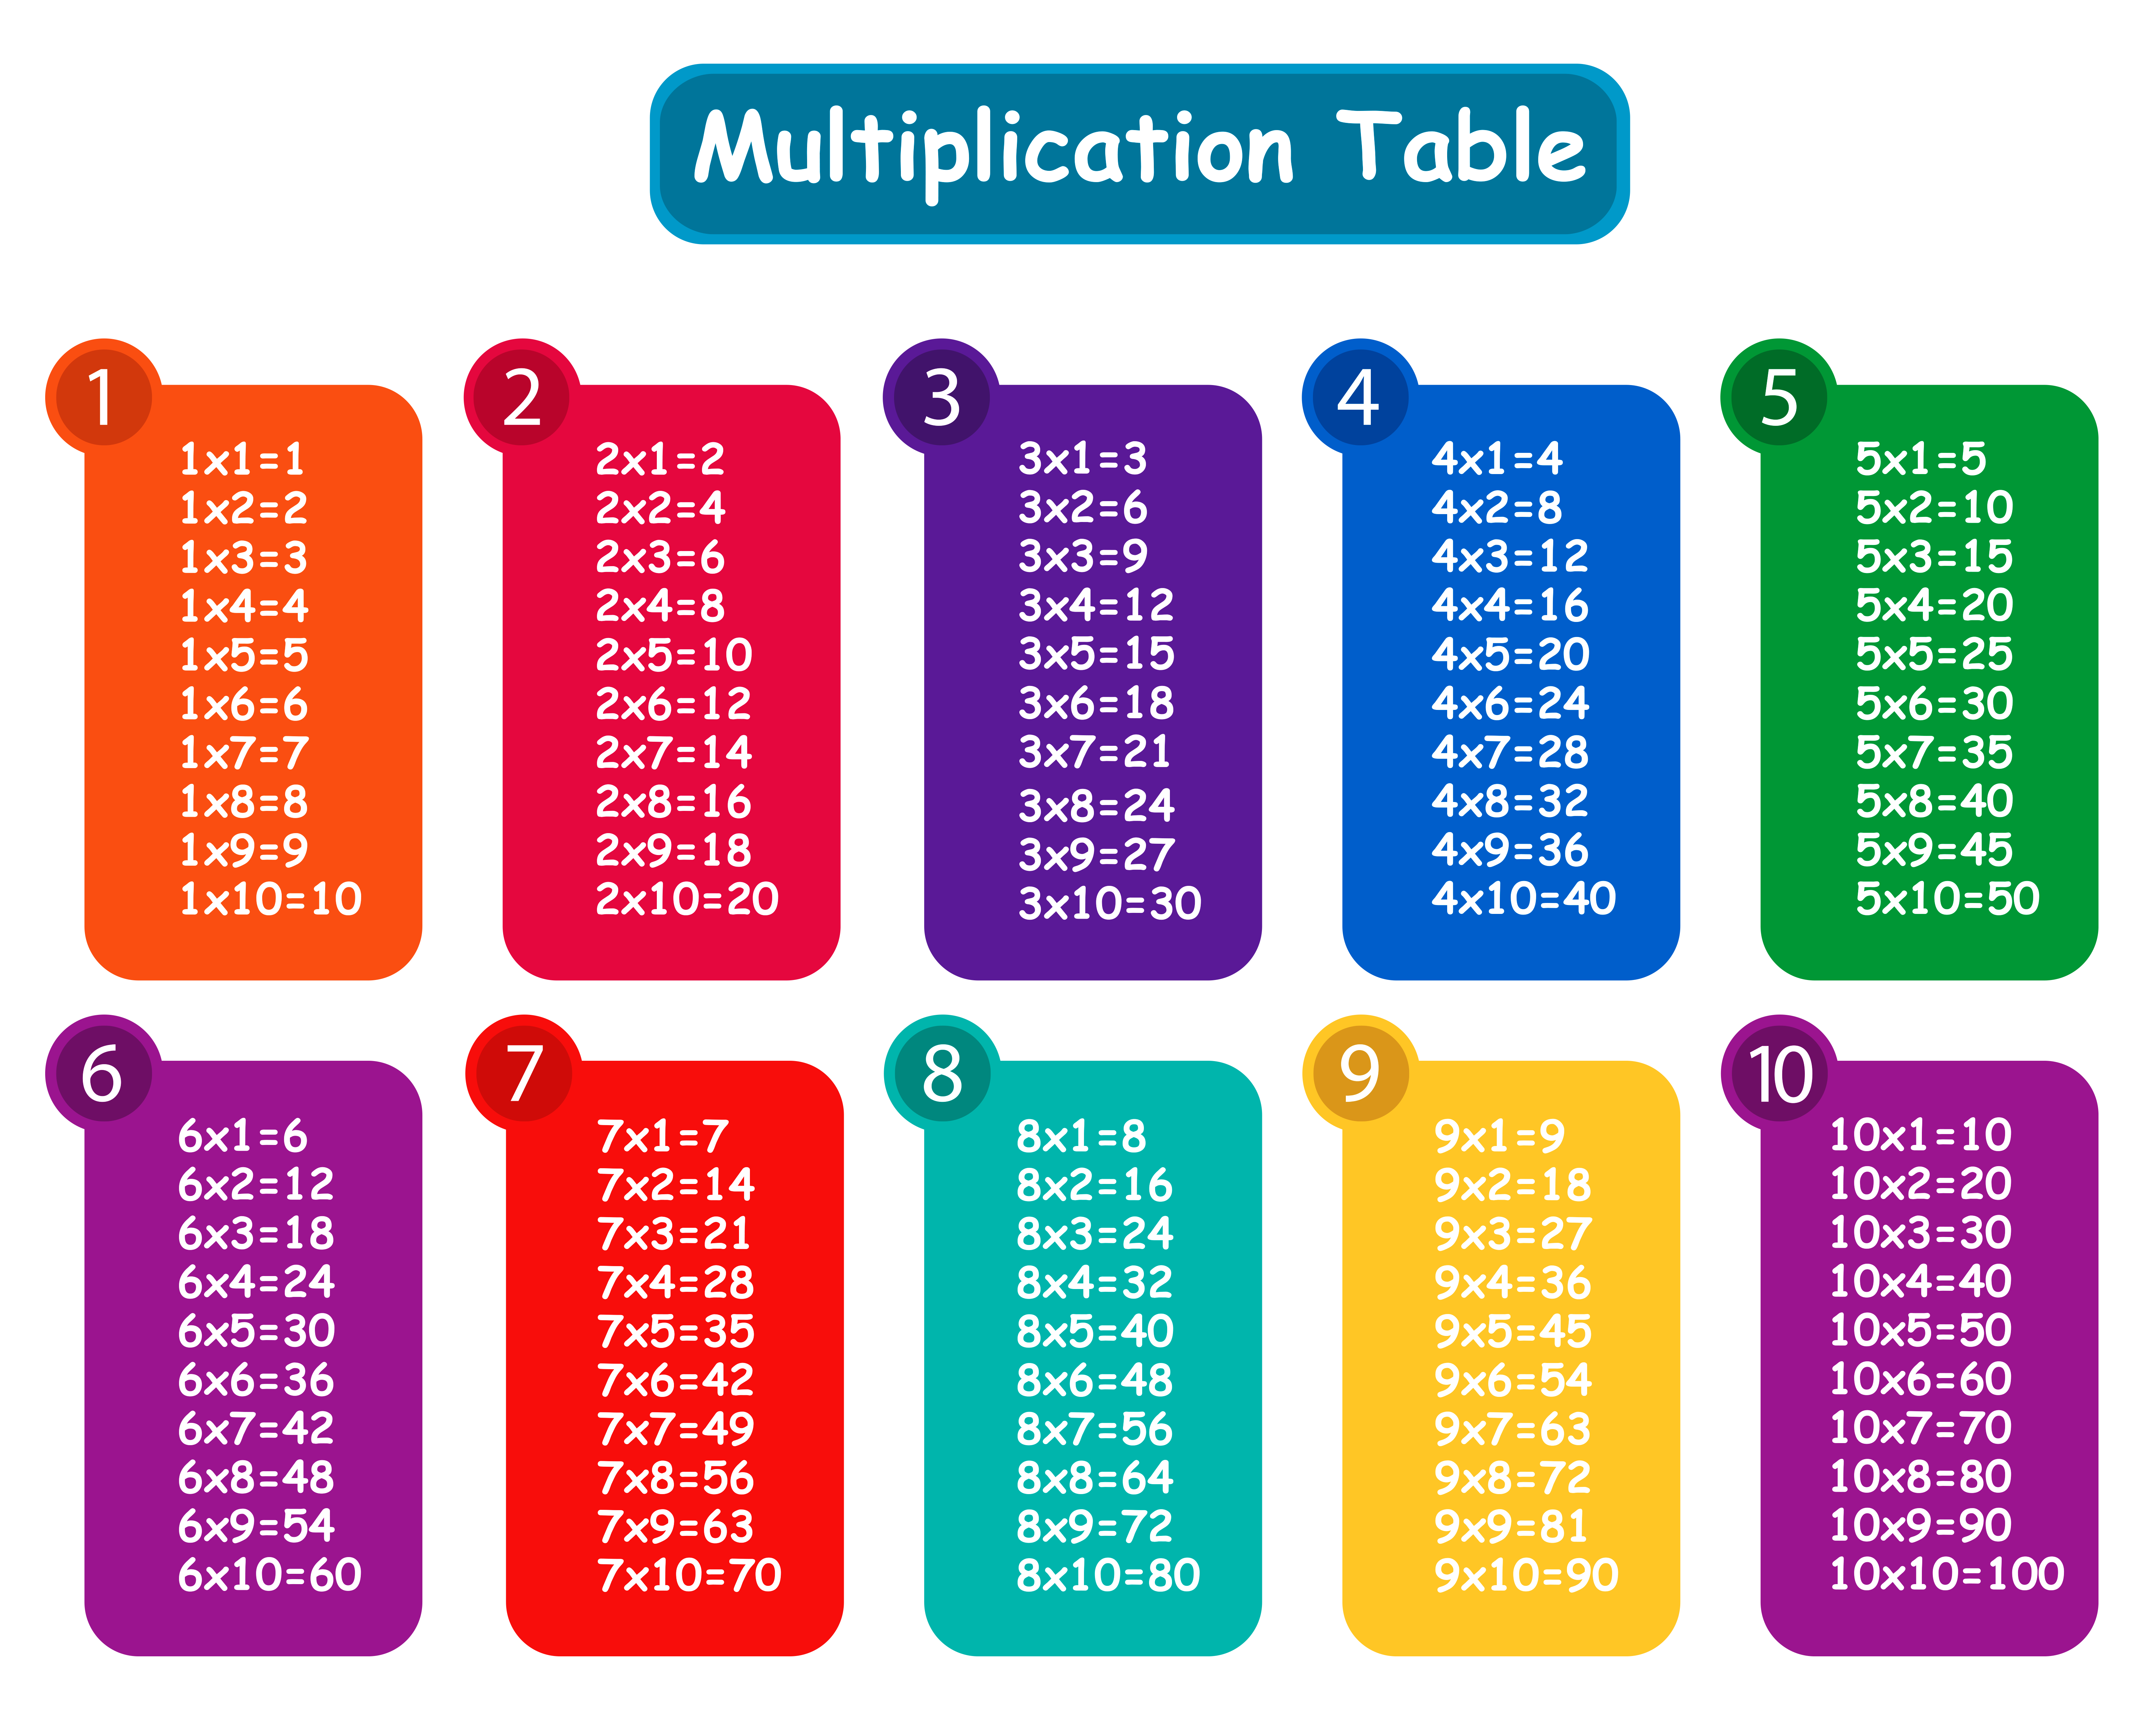 Multiplication clipart 1to. Colorful table png gallery